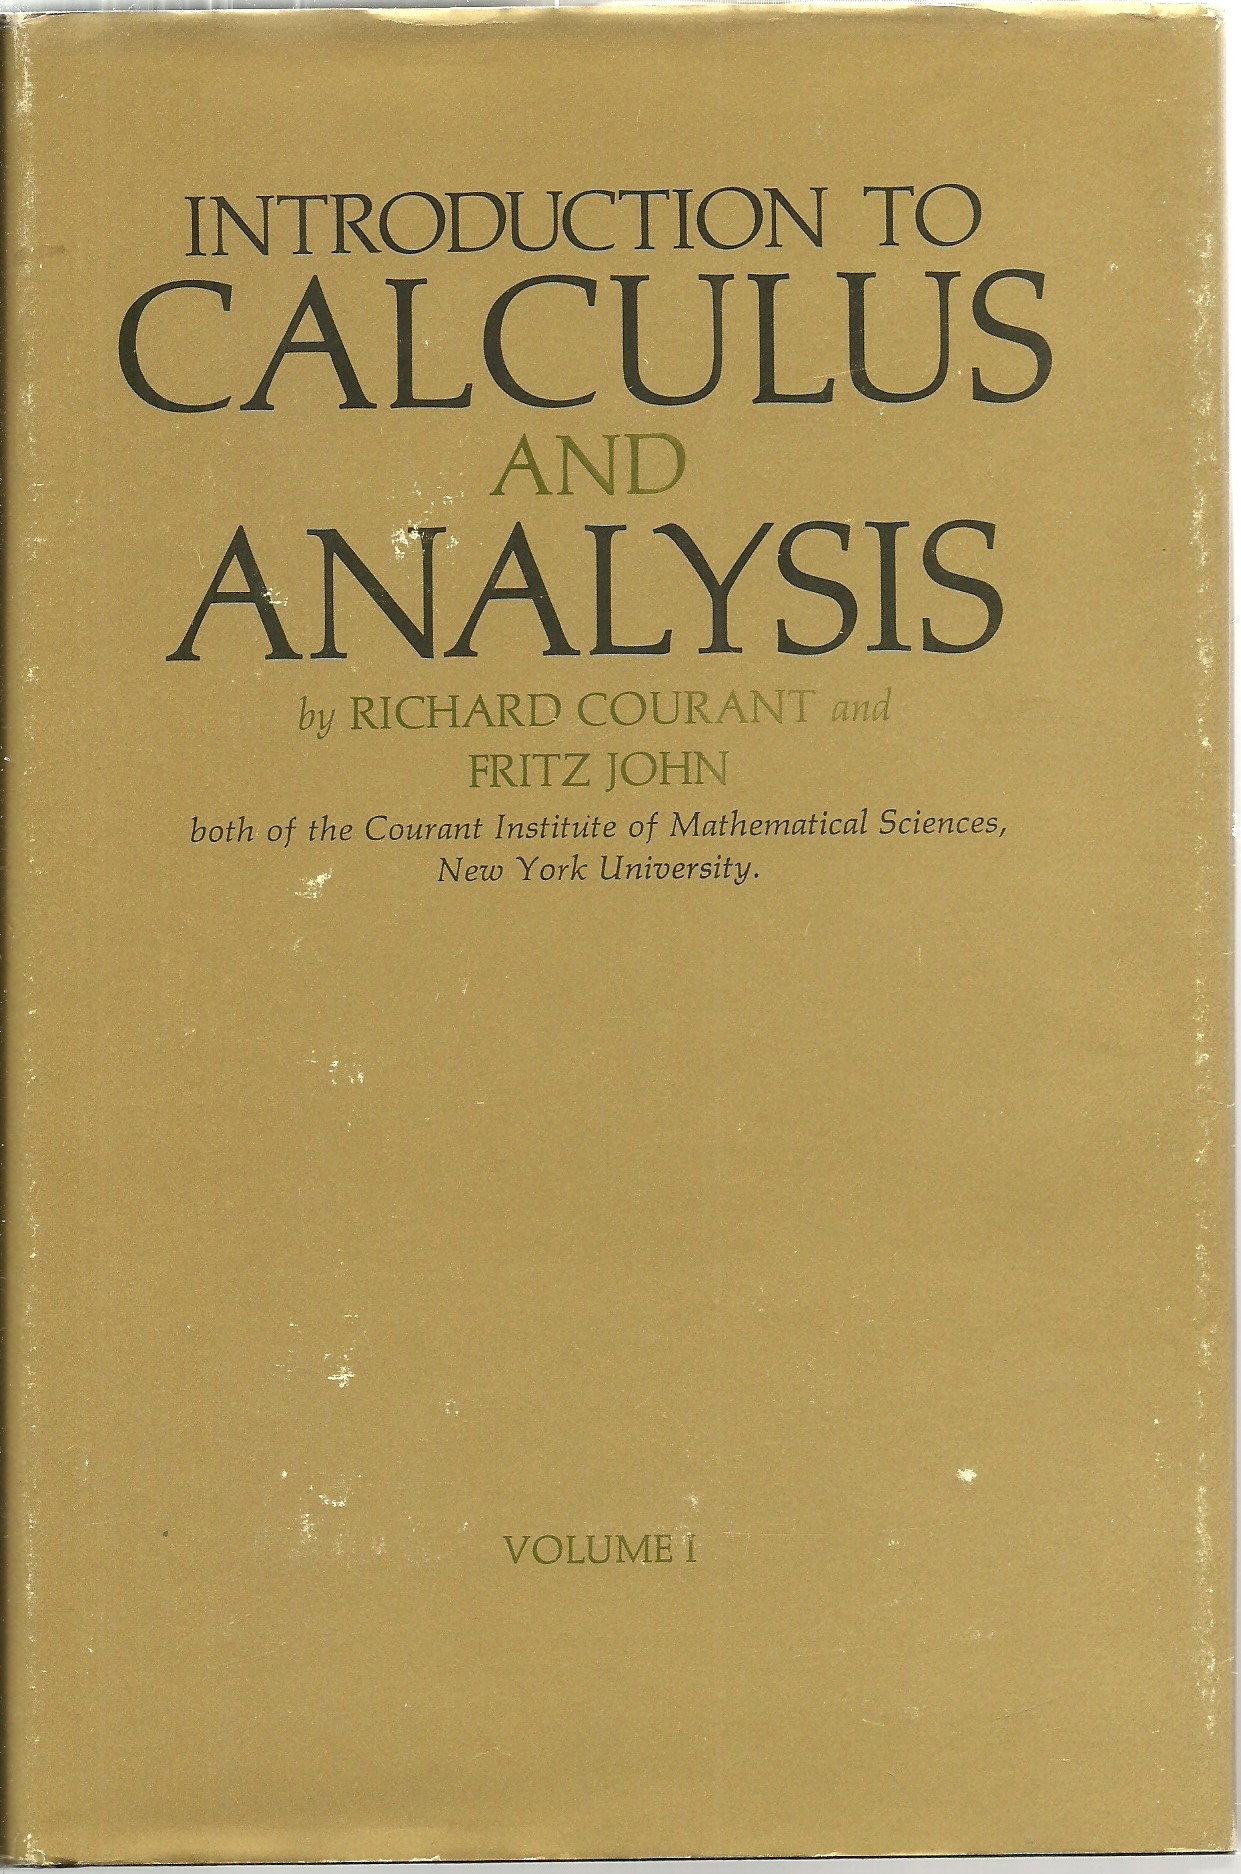 Introduction To Calculus And Analysis - Richard Courant and Fritz John